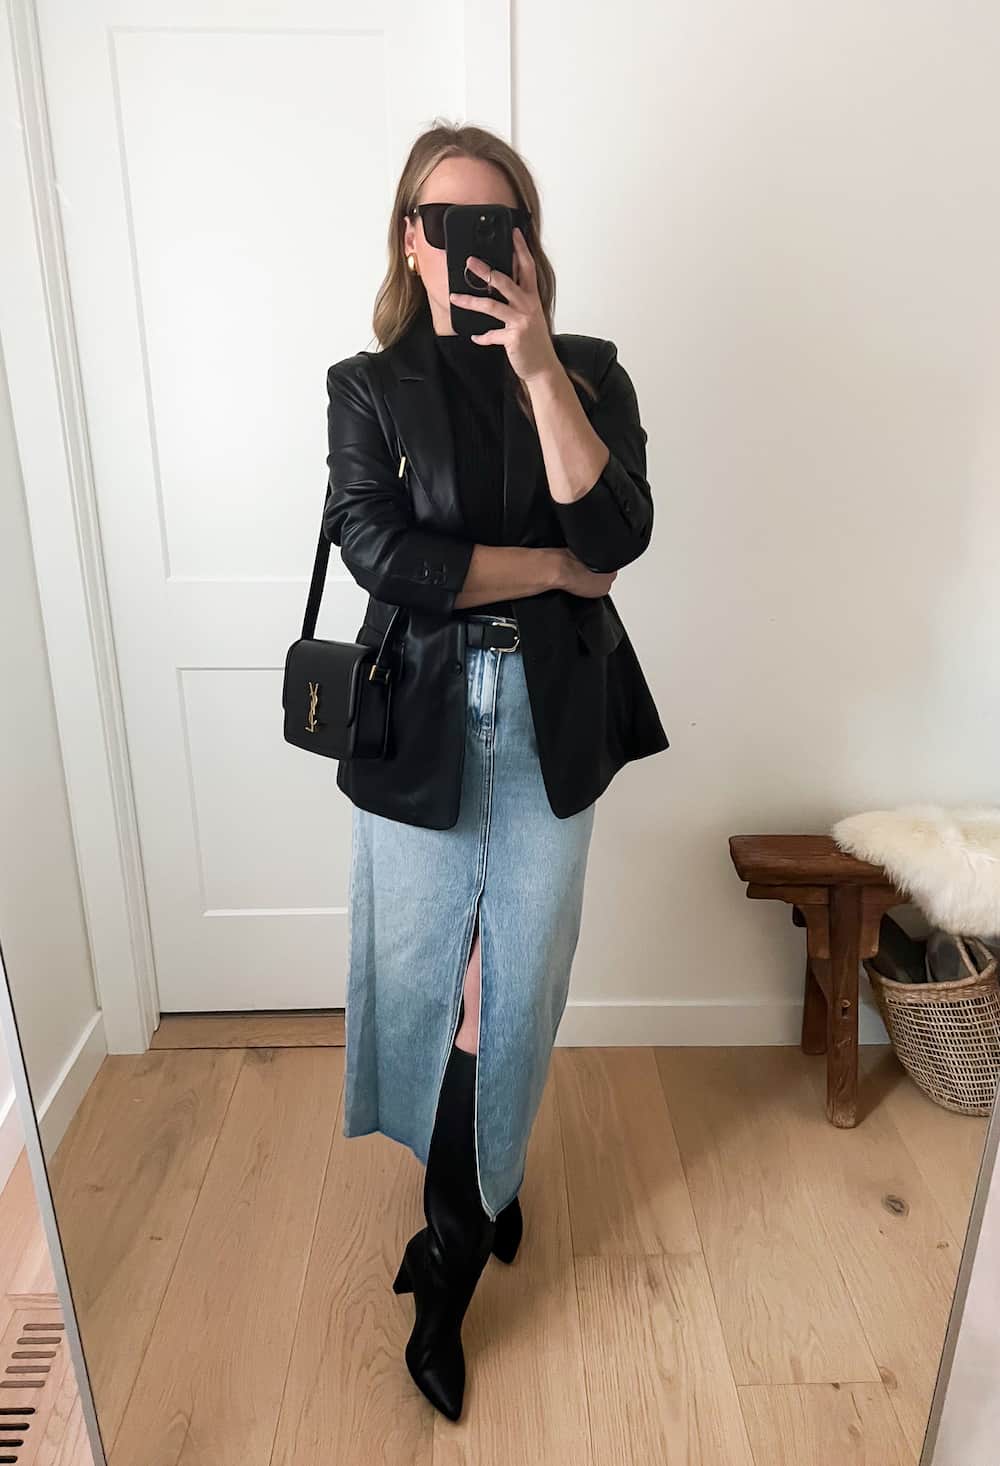 Christal wearing a long denim skirt with tall black boots and a black leather jacket.